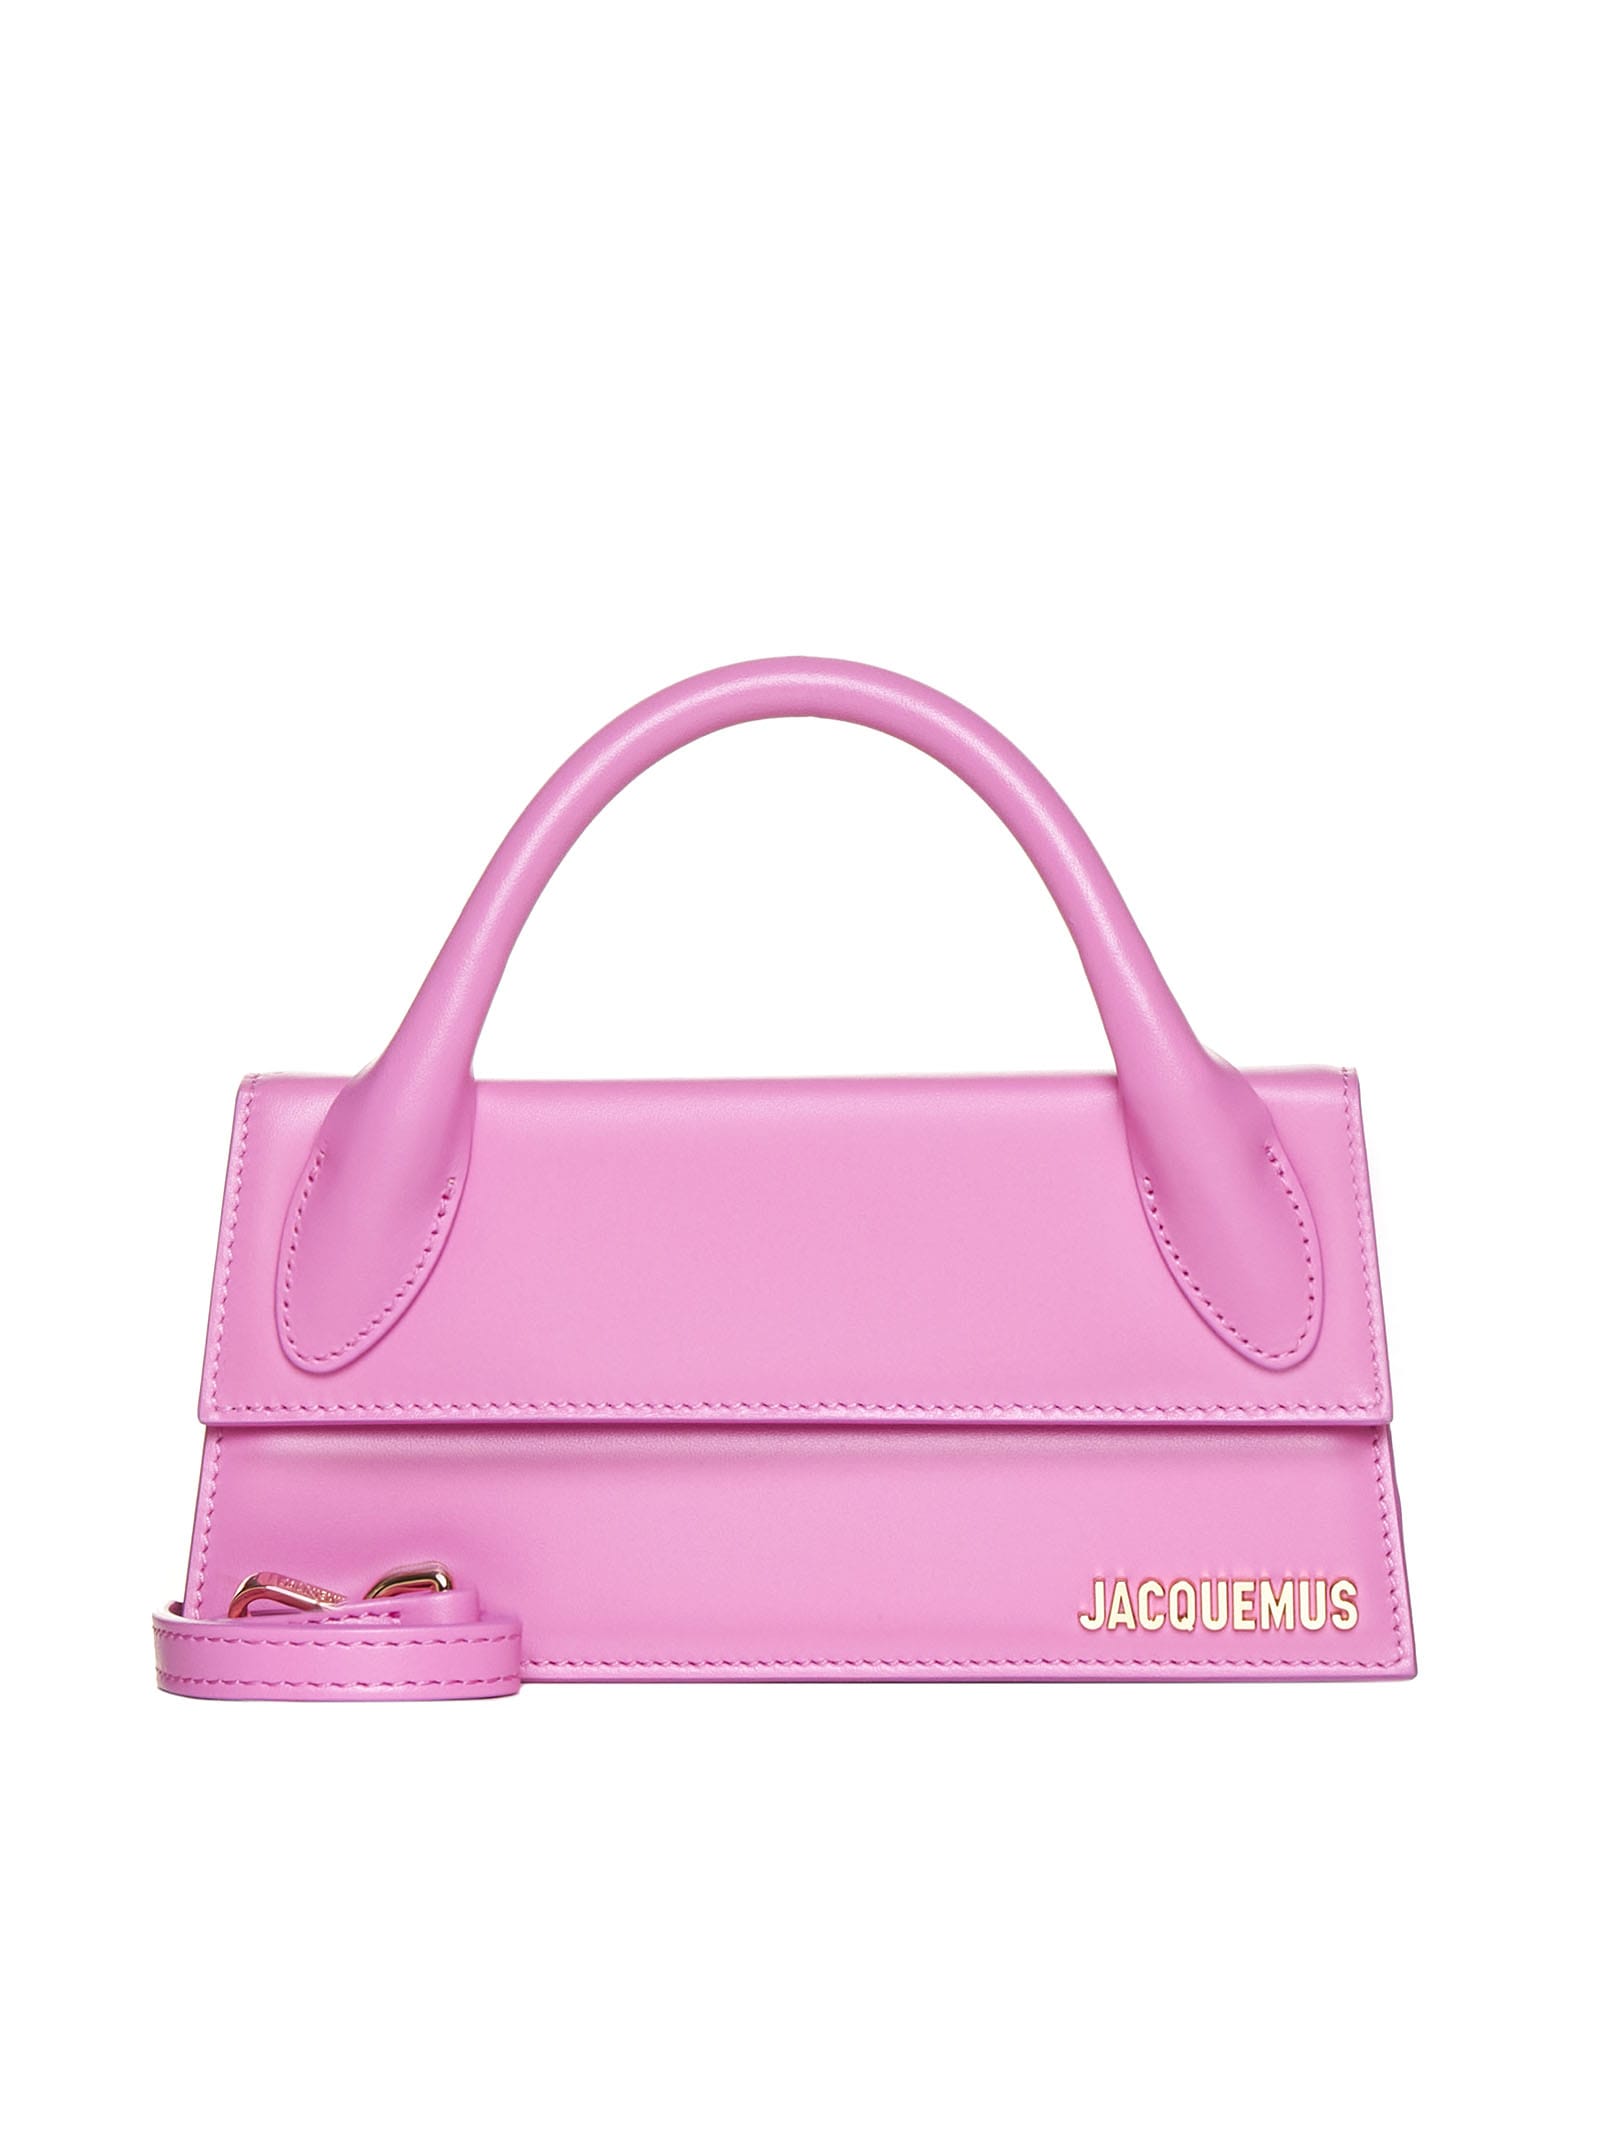 Jacquemus Tote In Pink